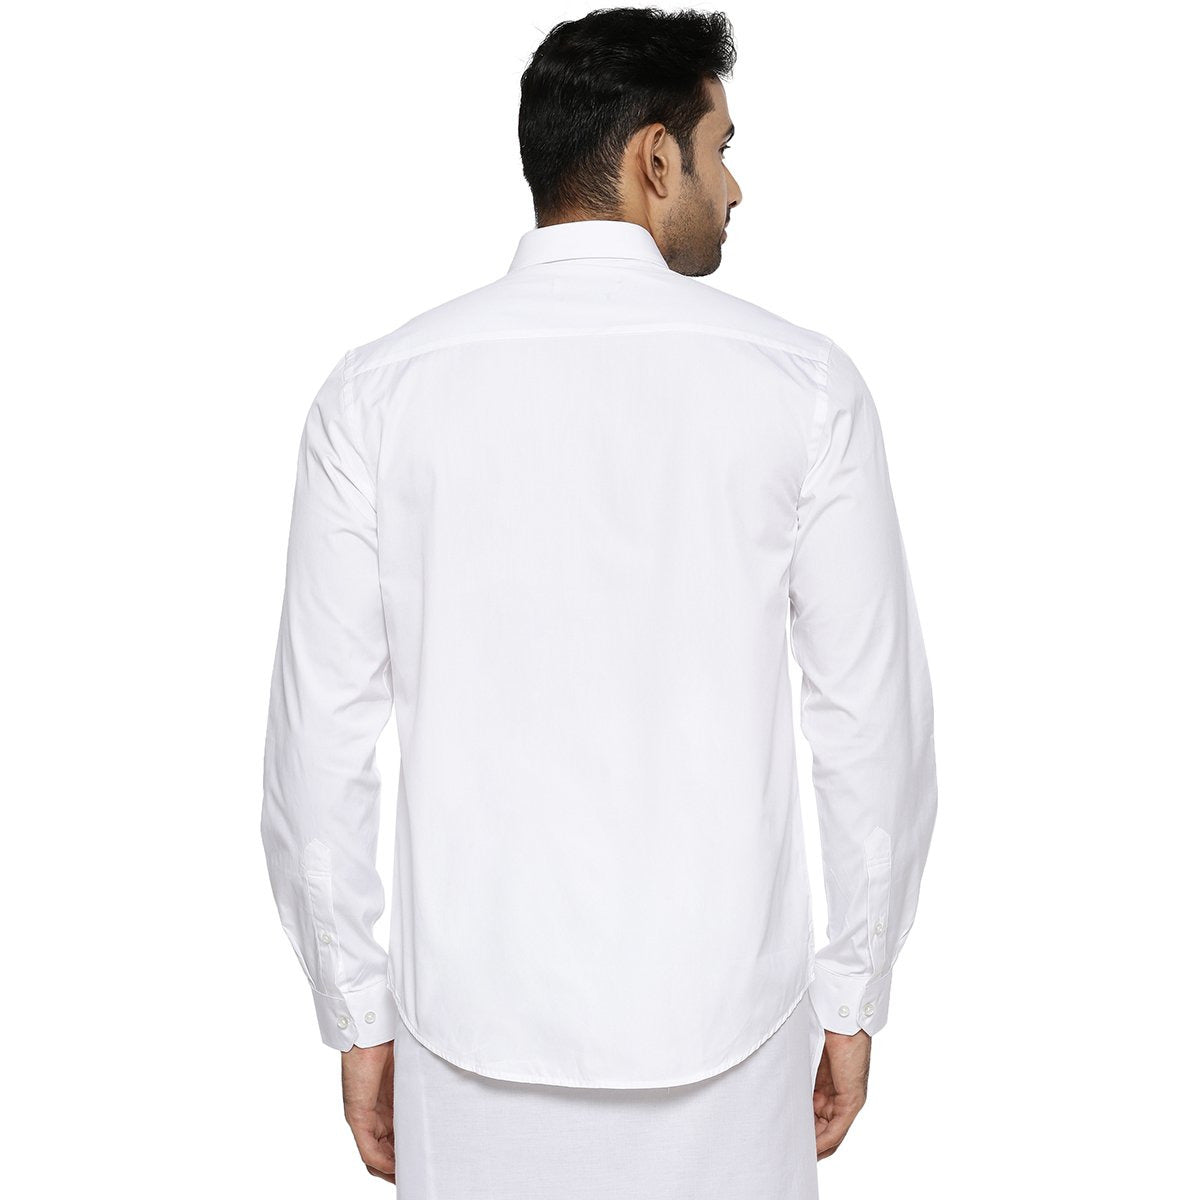 Mens Cotton White Shirt Full Sleeves Luxury Cotton-Back view